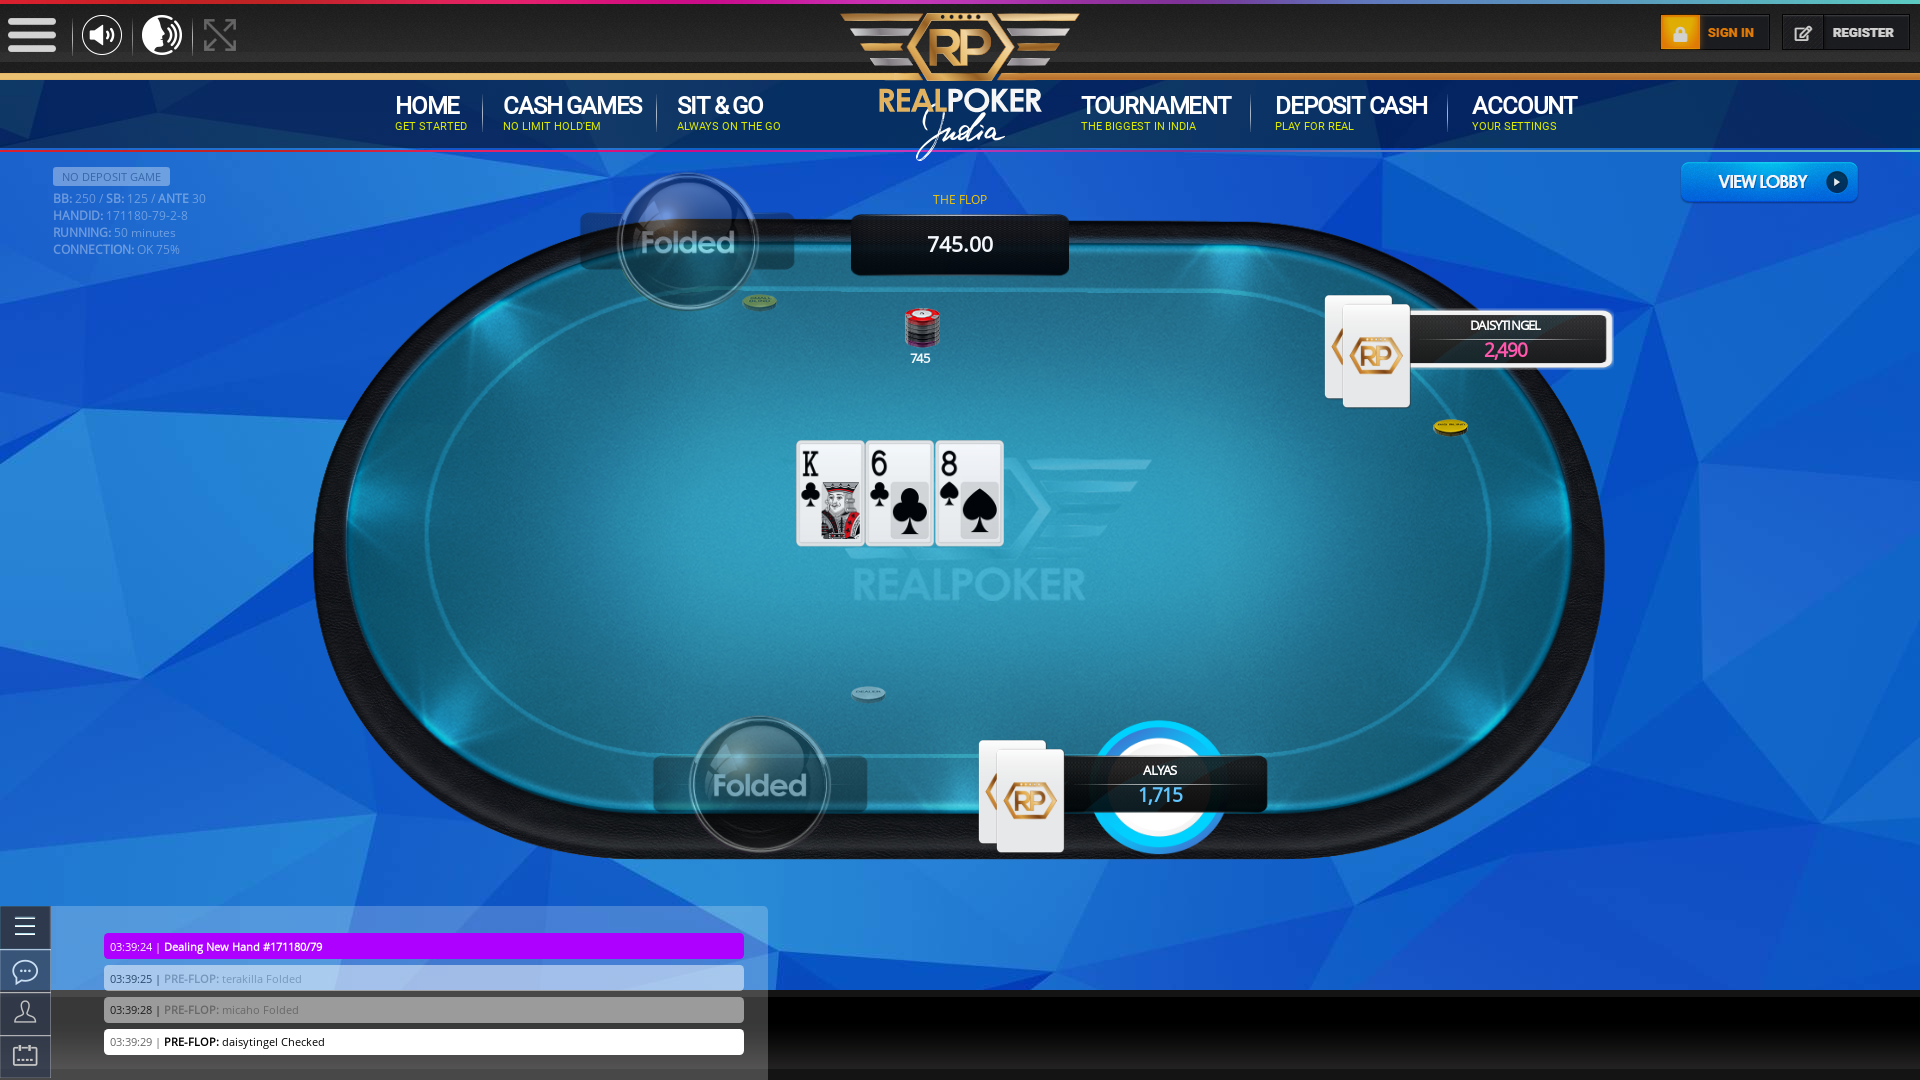 Real poker 10 player table in the 50th minute of the match